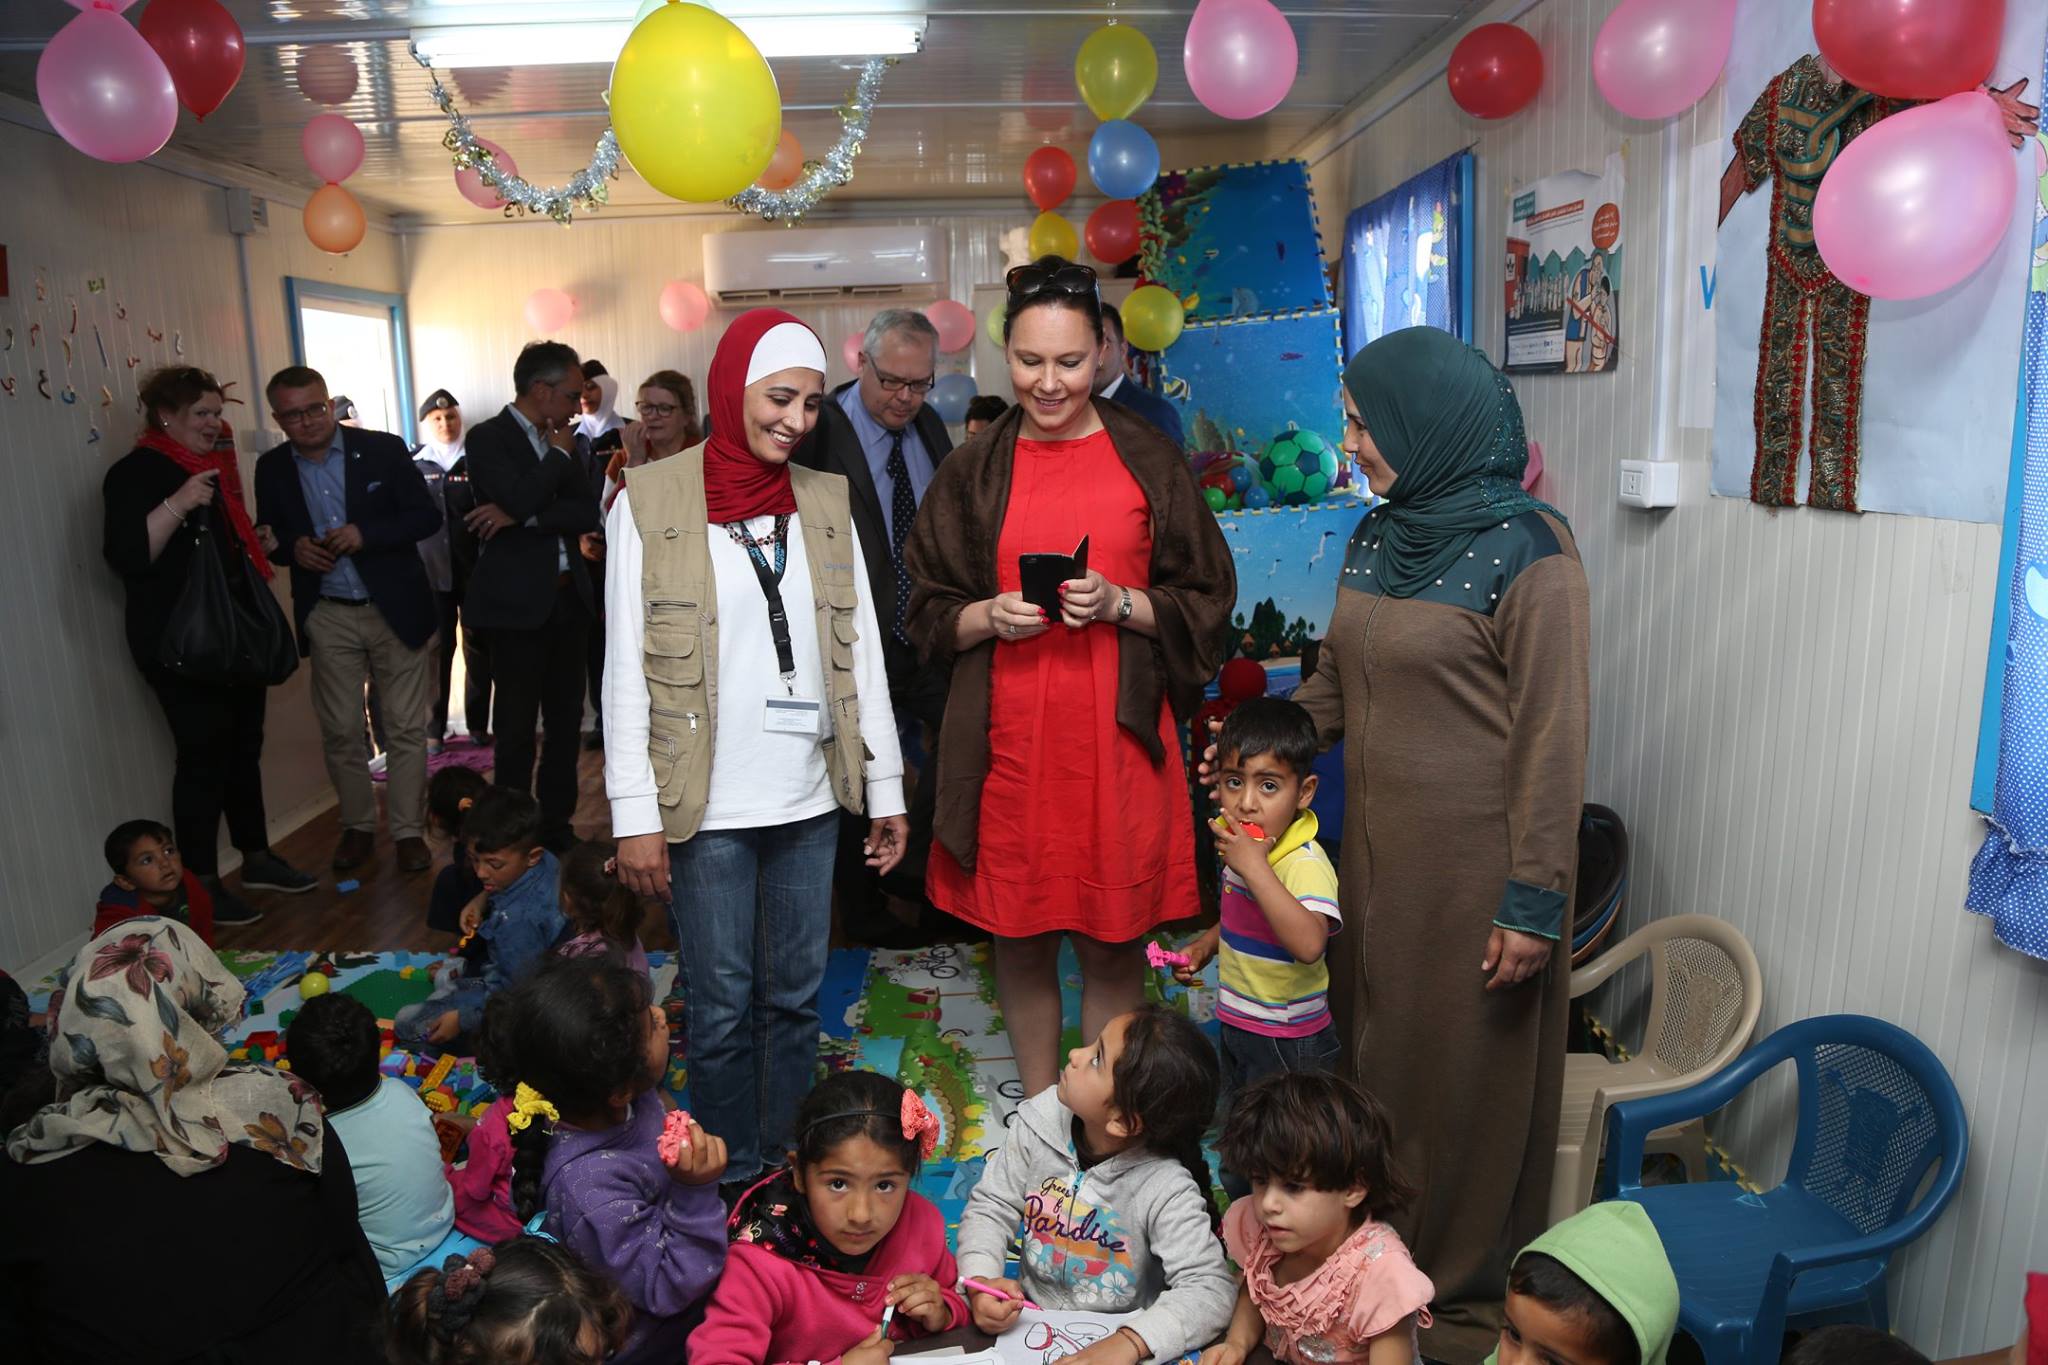 Mrs. Virolainen had the chance to greet women within each of the sectors available to the women and girls livelihood centre including the childcare and nursery facilities. Photo source: UN Women/ Ghaith Al Bahri